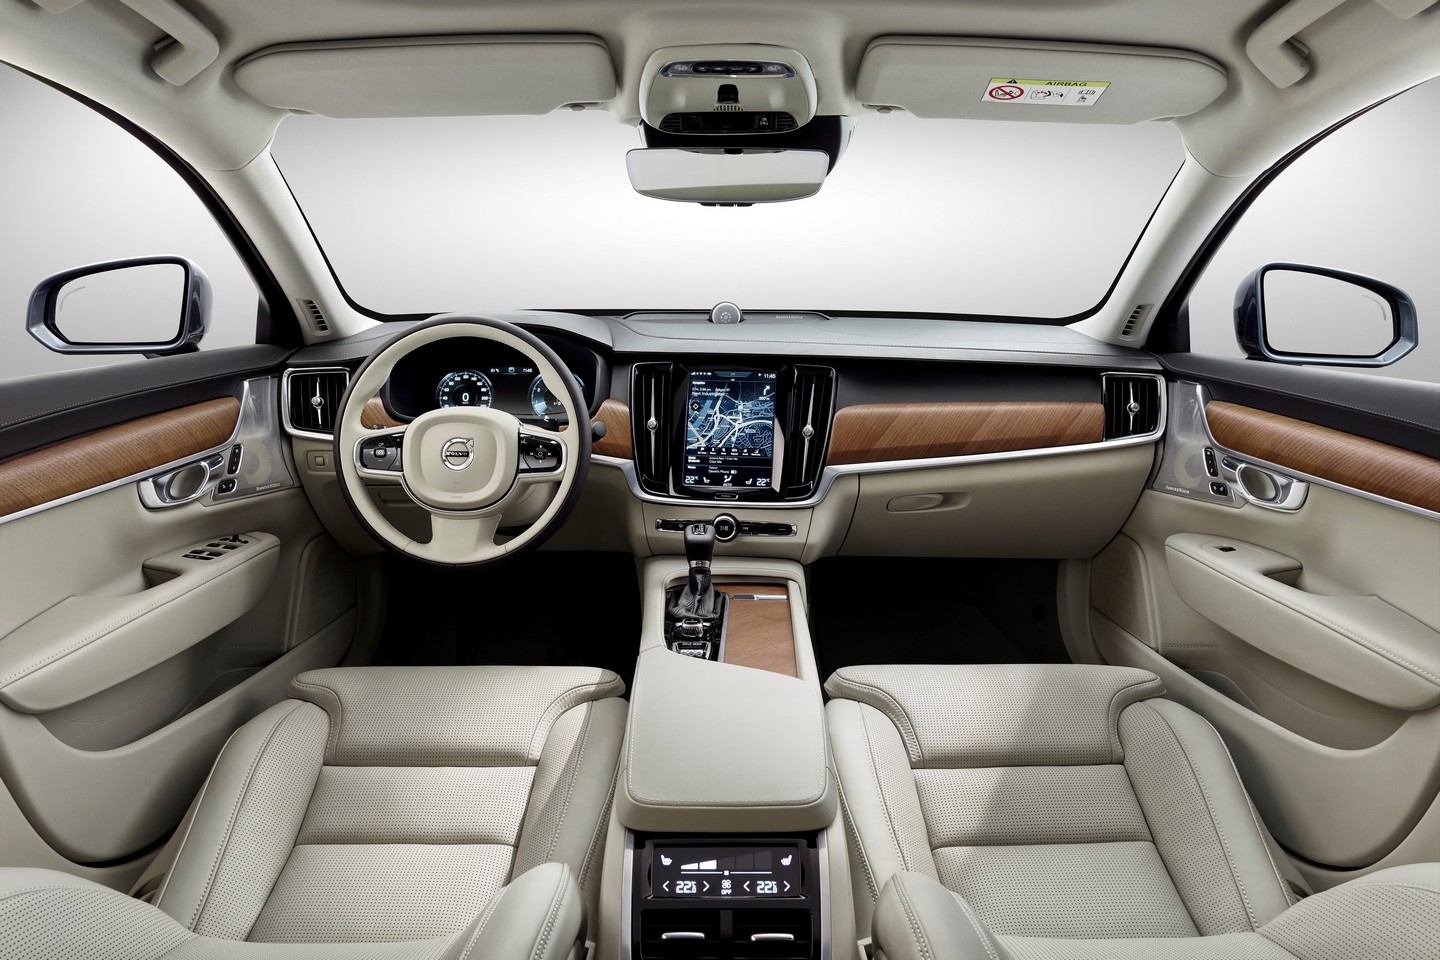 Volvo S90 dashboard unveiled